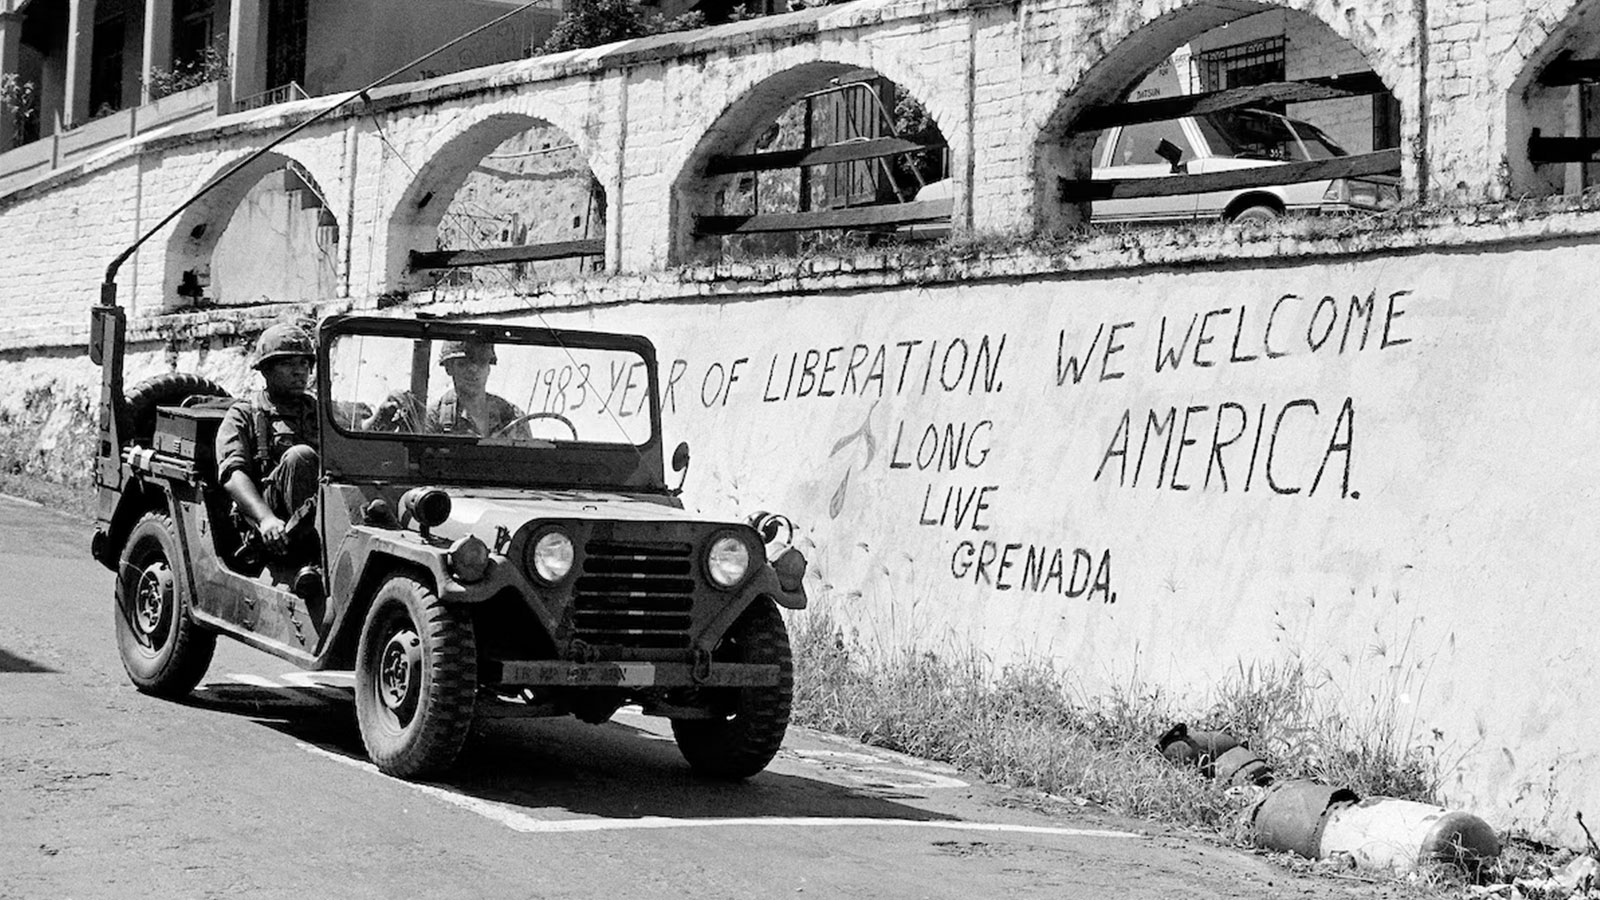 U.S. members of the multinational peacekeeping force drive their jeep past a wall with graffiti welcoming Americans in St. George's, Grenada, Nov. 10, 1983. 